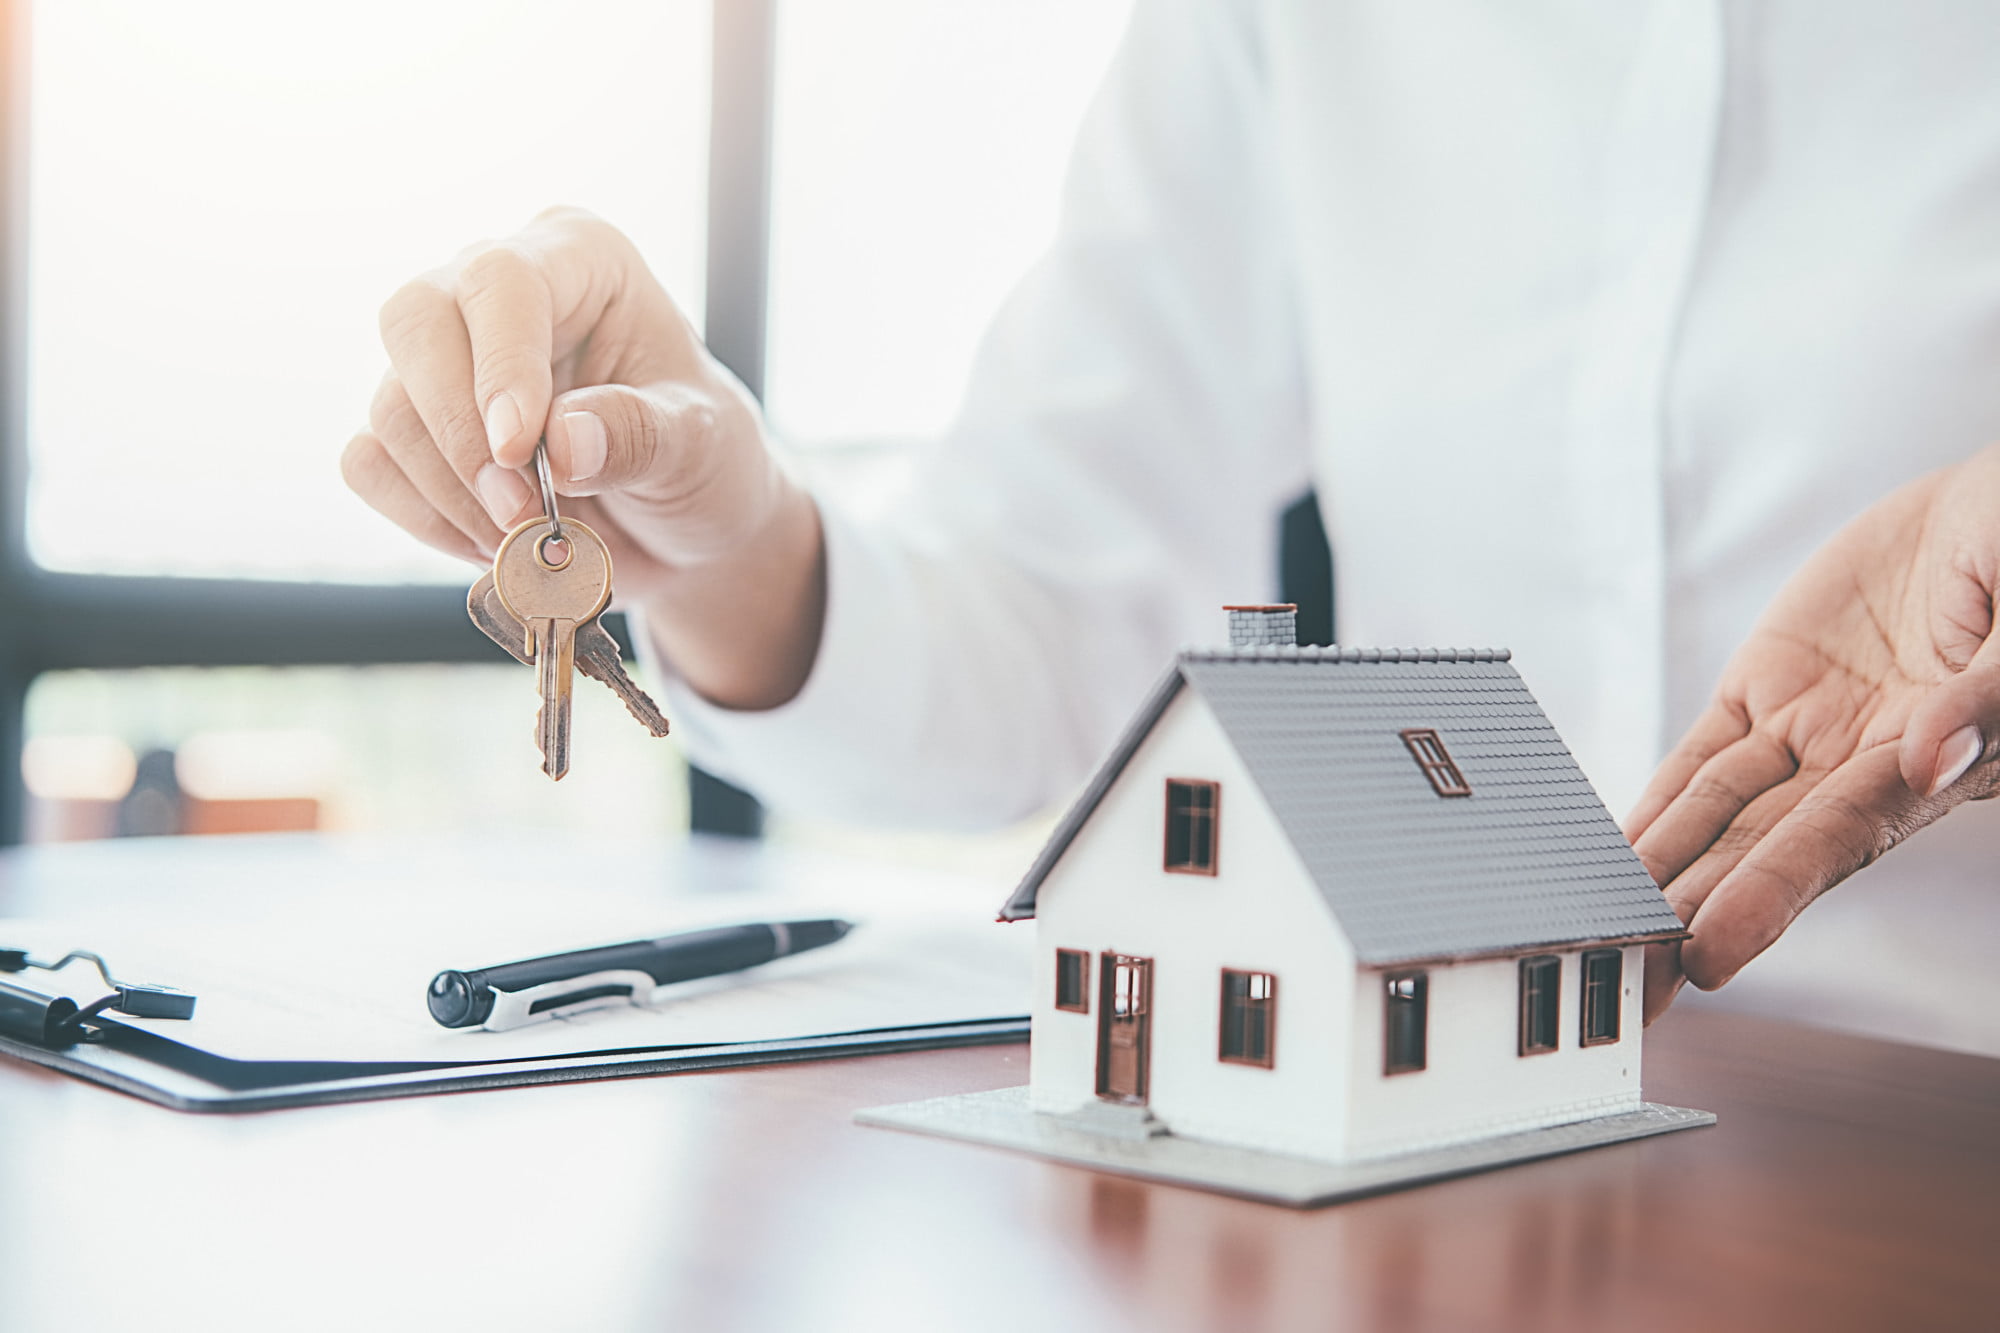 What does a real estate advisor do, and how can they help you with investments? Read this guide to learn about these services and their benefits.